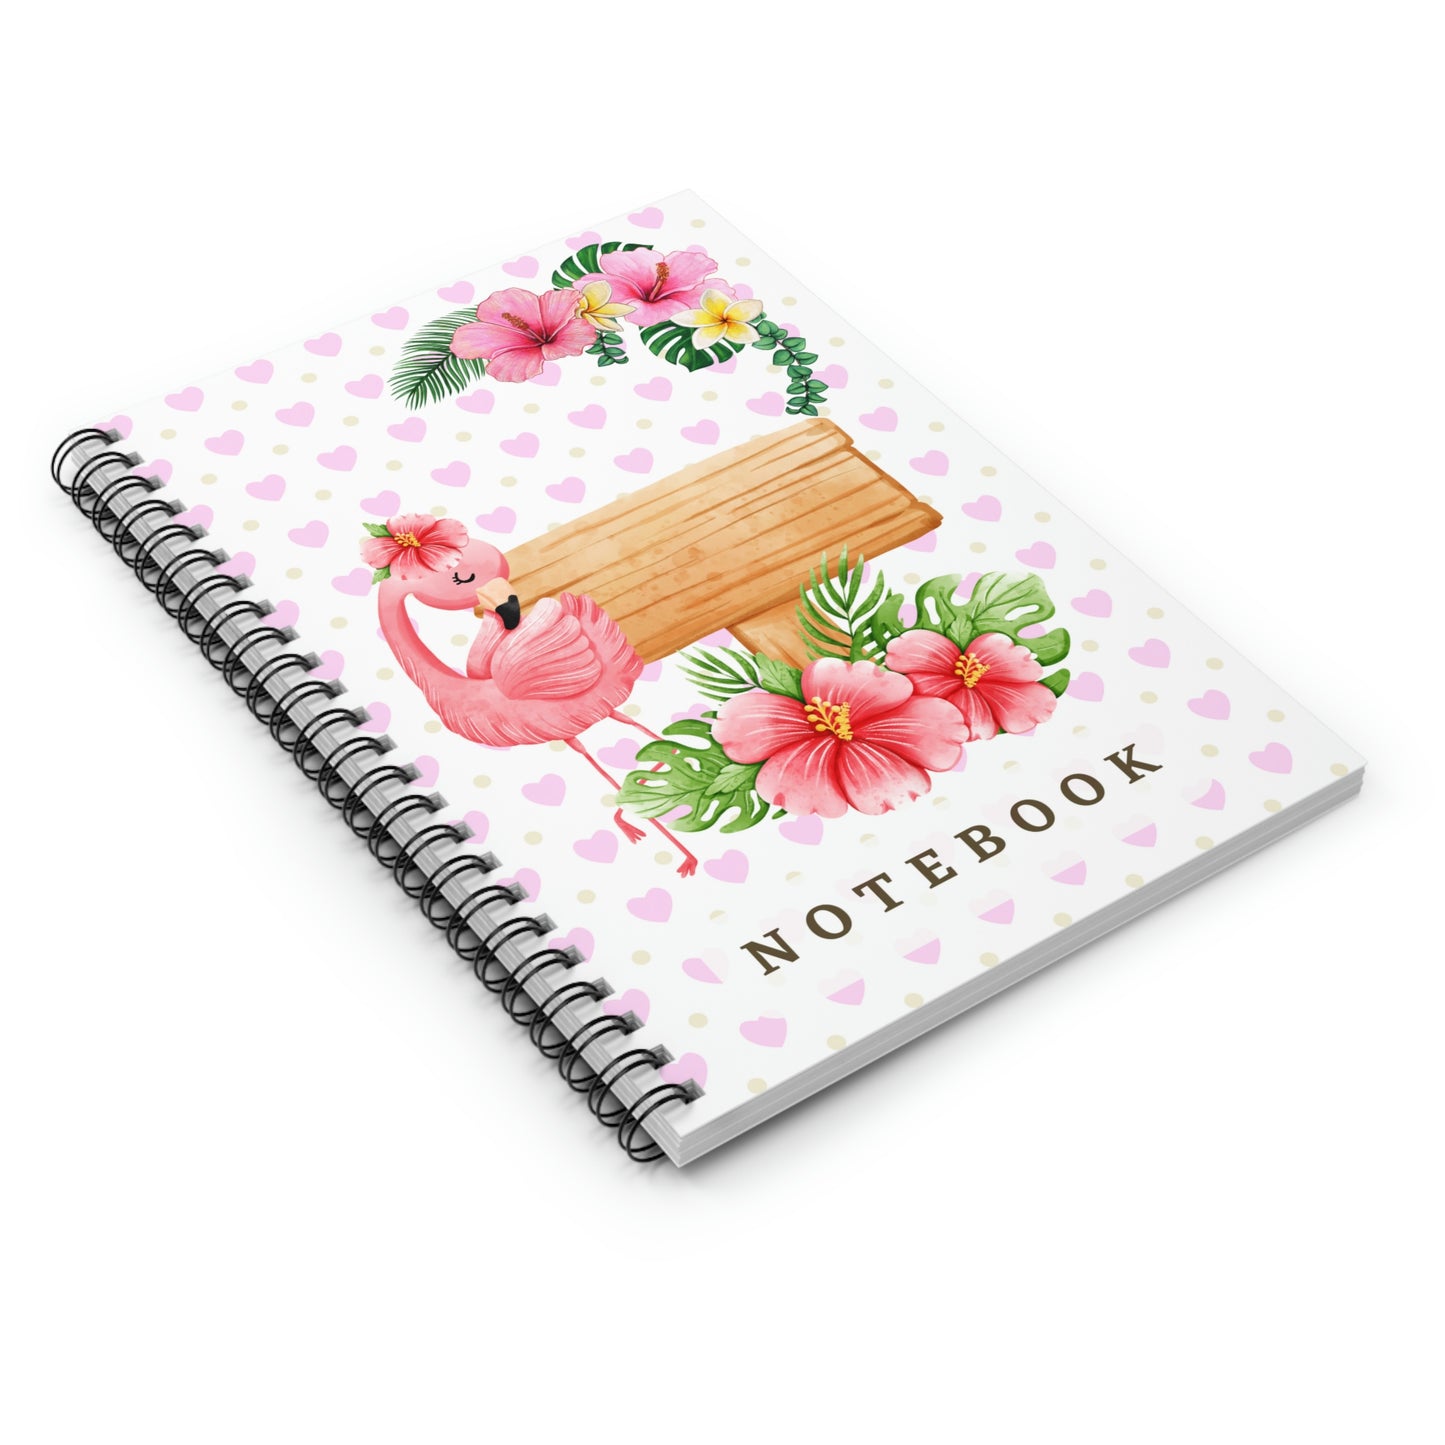 Cute Flamingo with Hibiscus design Spiral Notebook - Ruled Line 118 pages